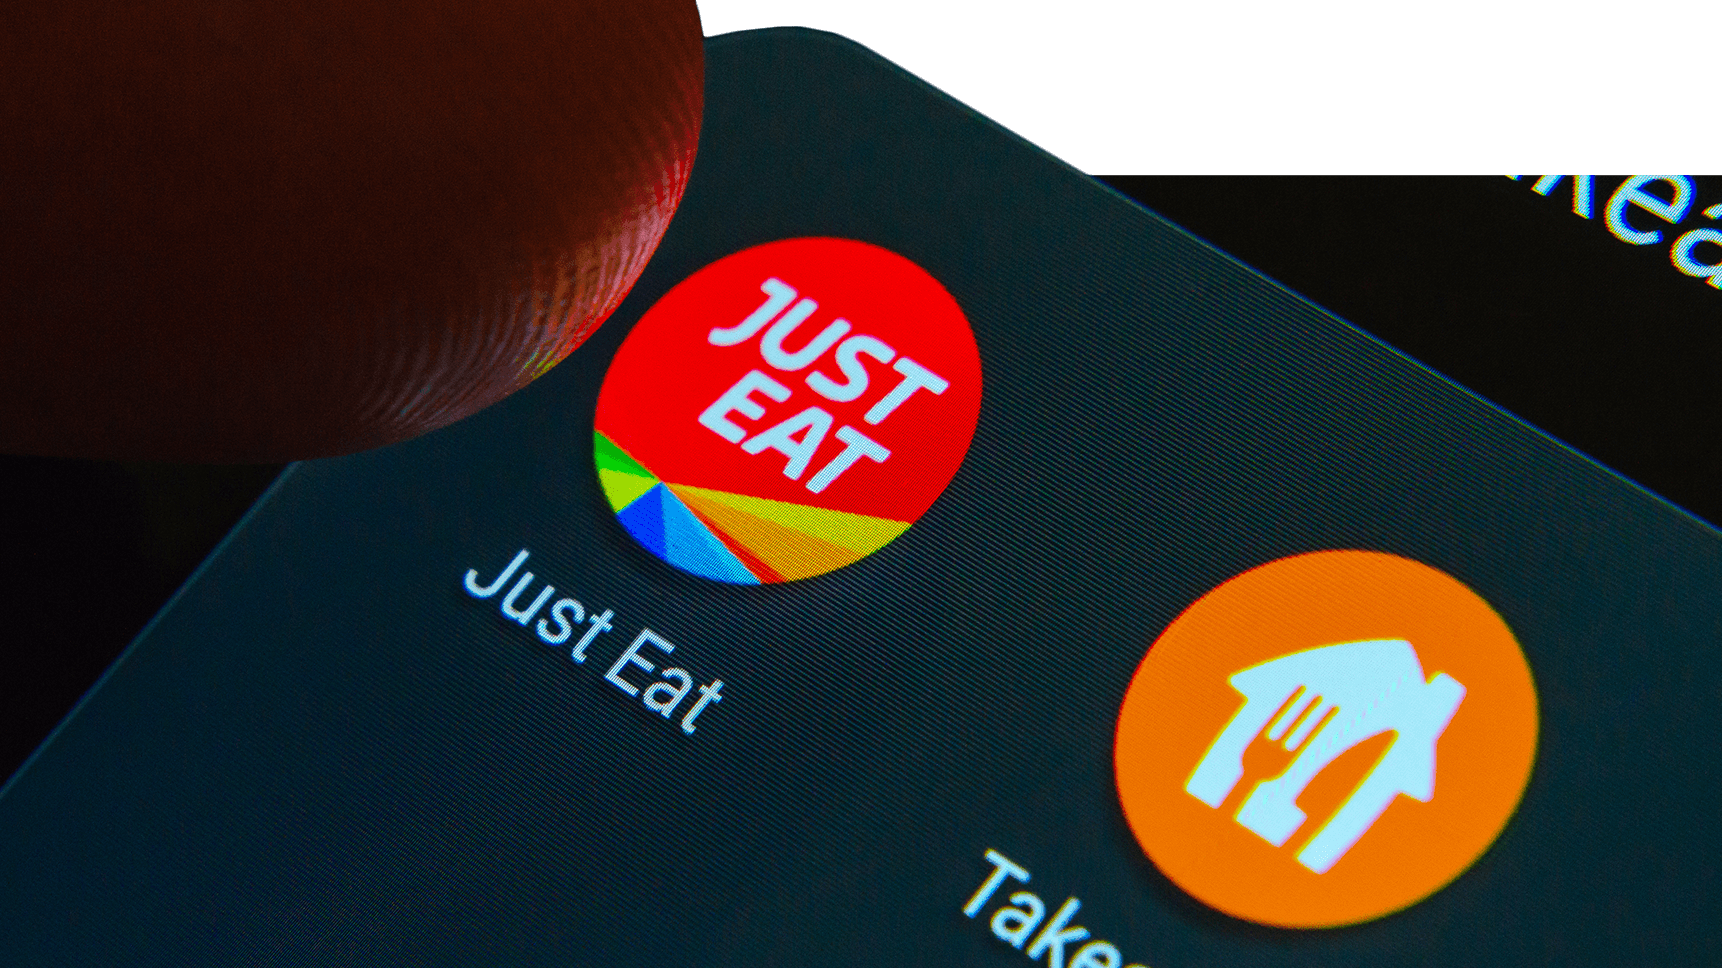 Just Eat and Takeaway.com announced a merger earlier this year. Source: Shutterstock